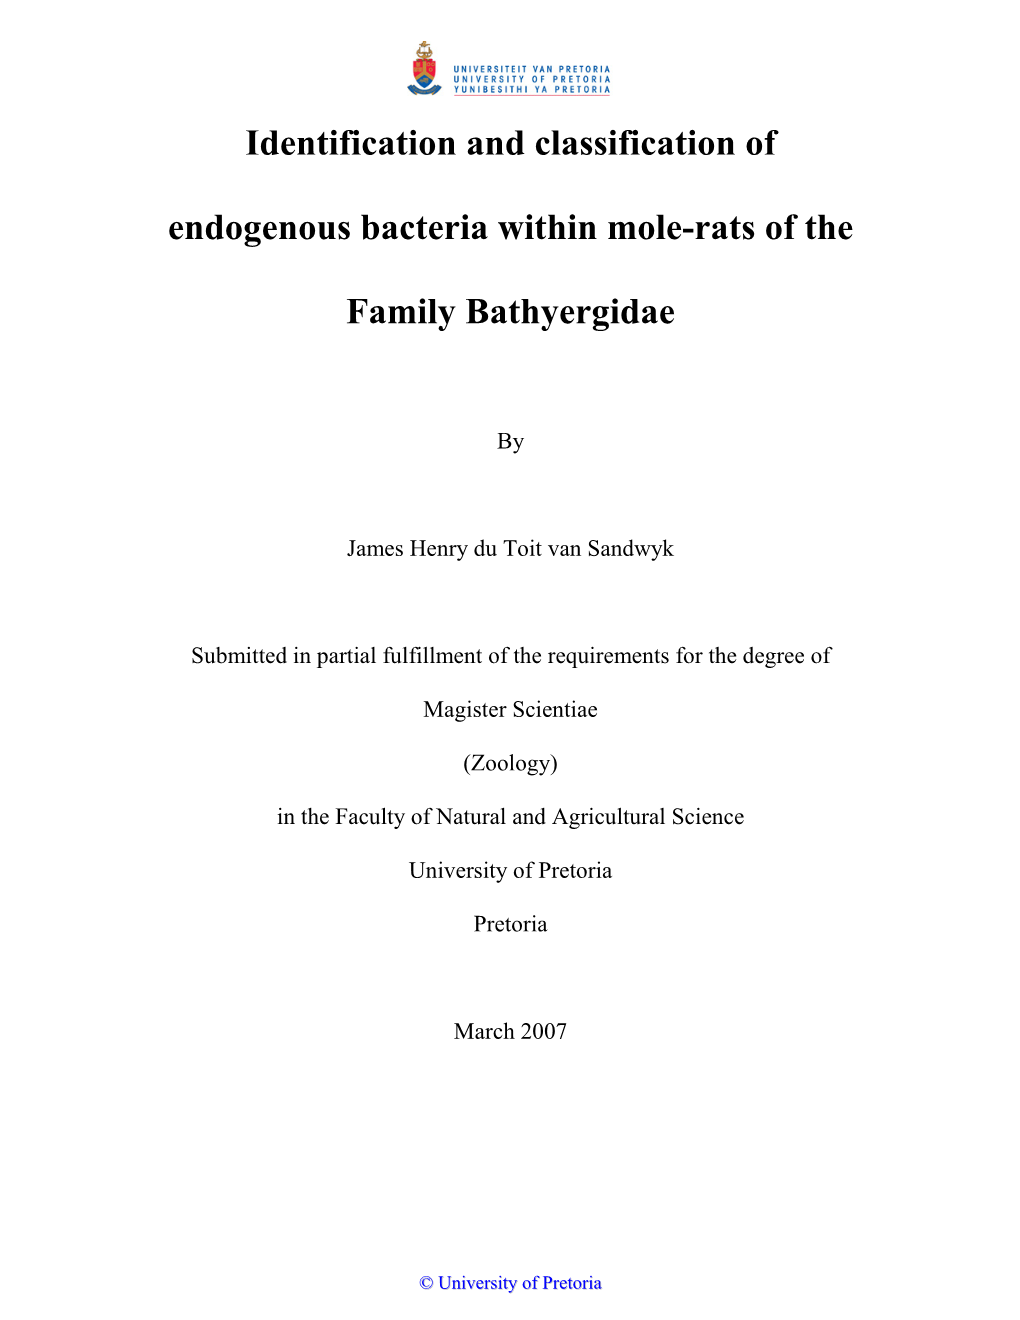 Identification and Classification of Endogenous Bacteria Within Mole-Rats of The